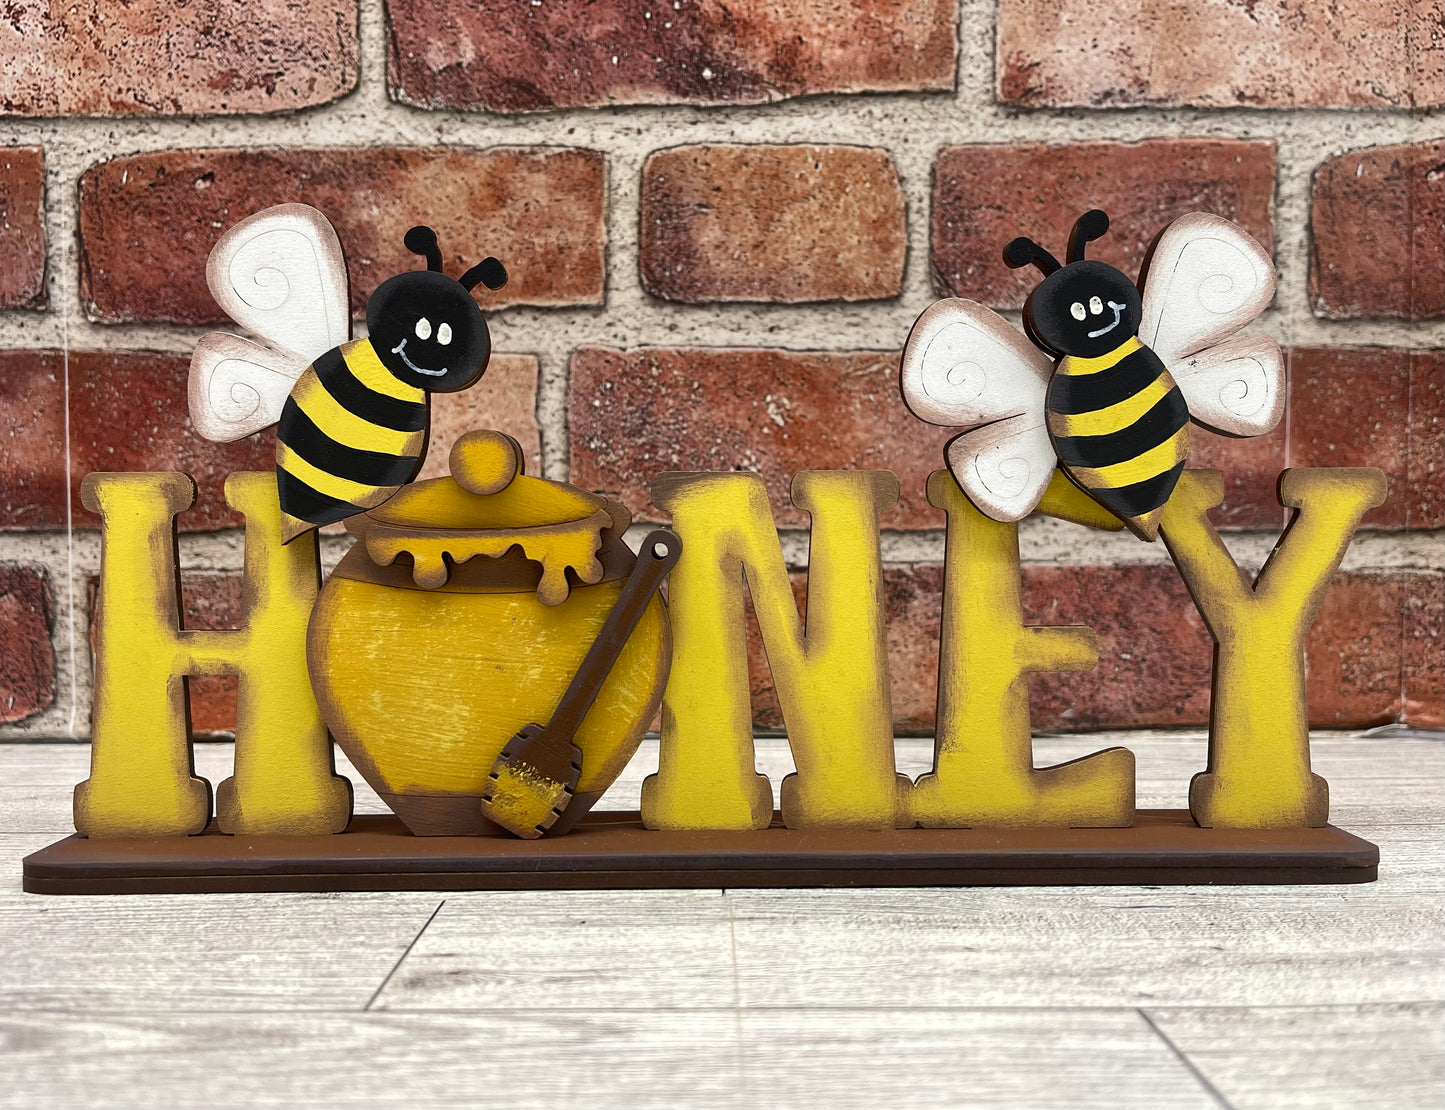 April Craft Kit - Bee Themed - basket and water globe not included